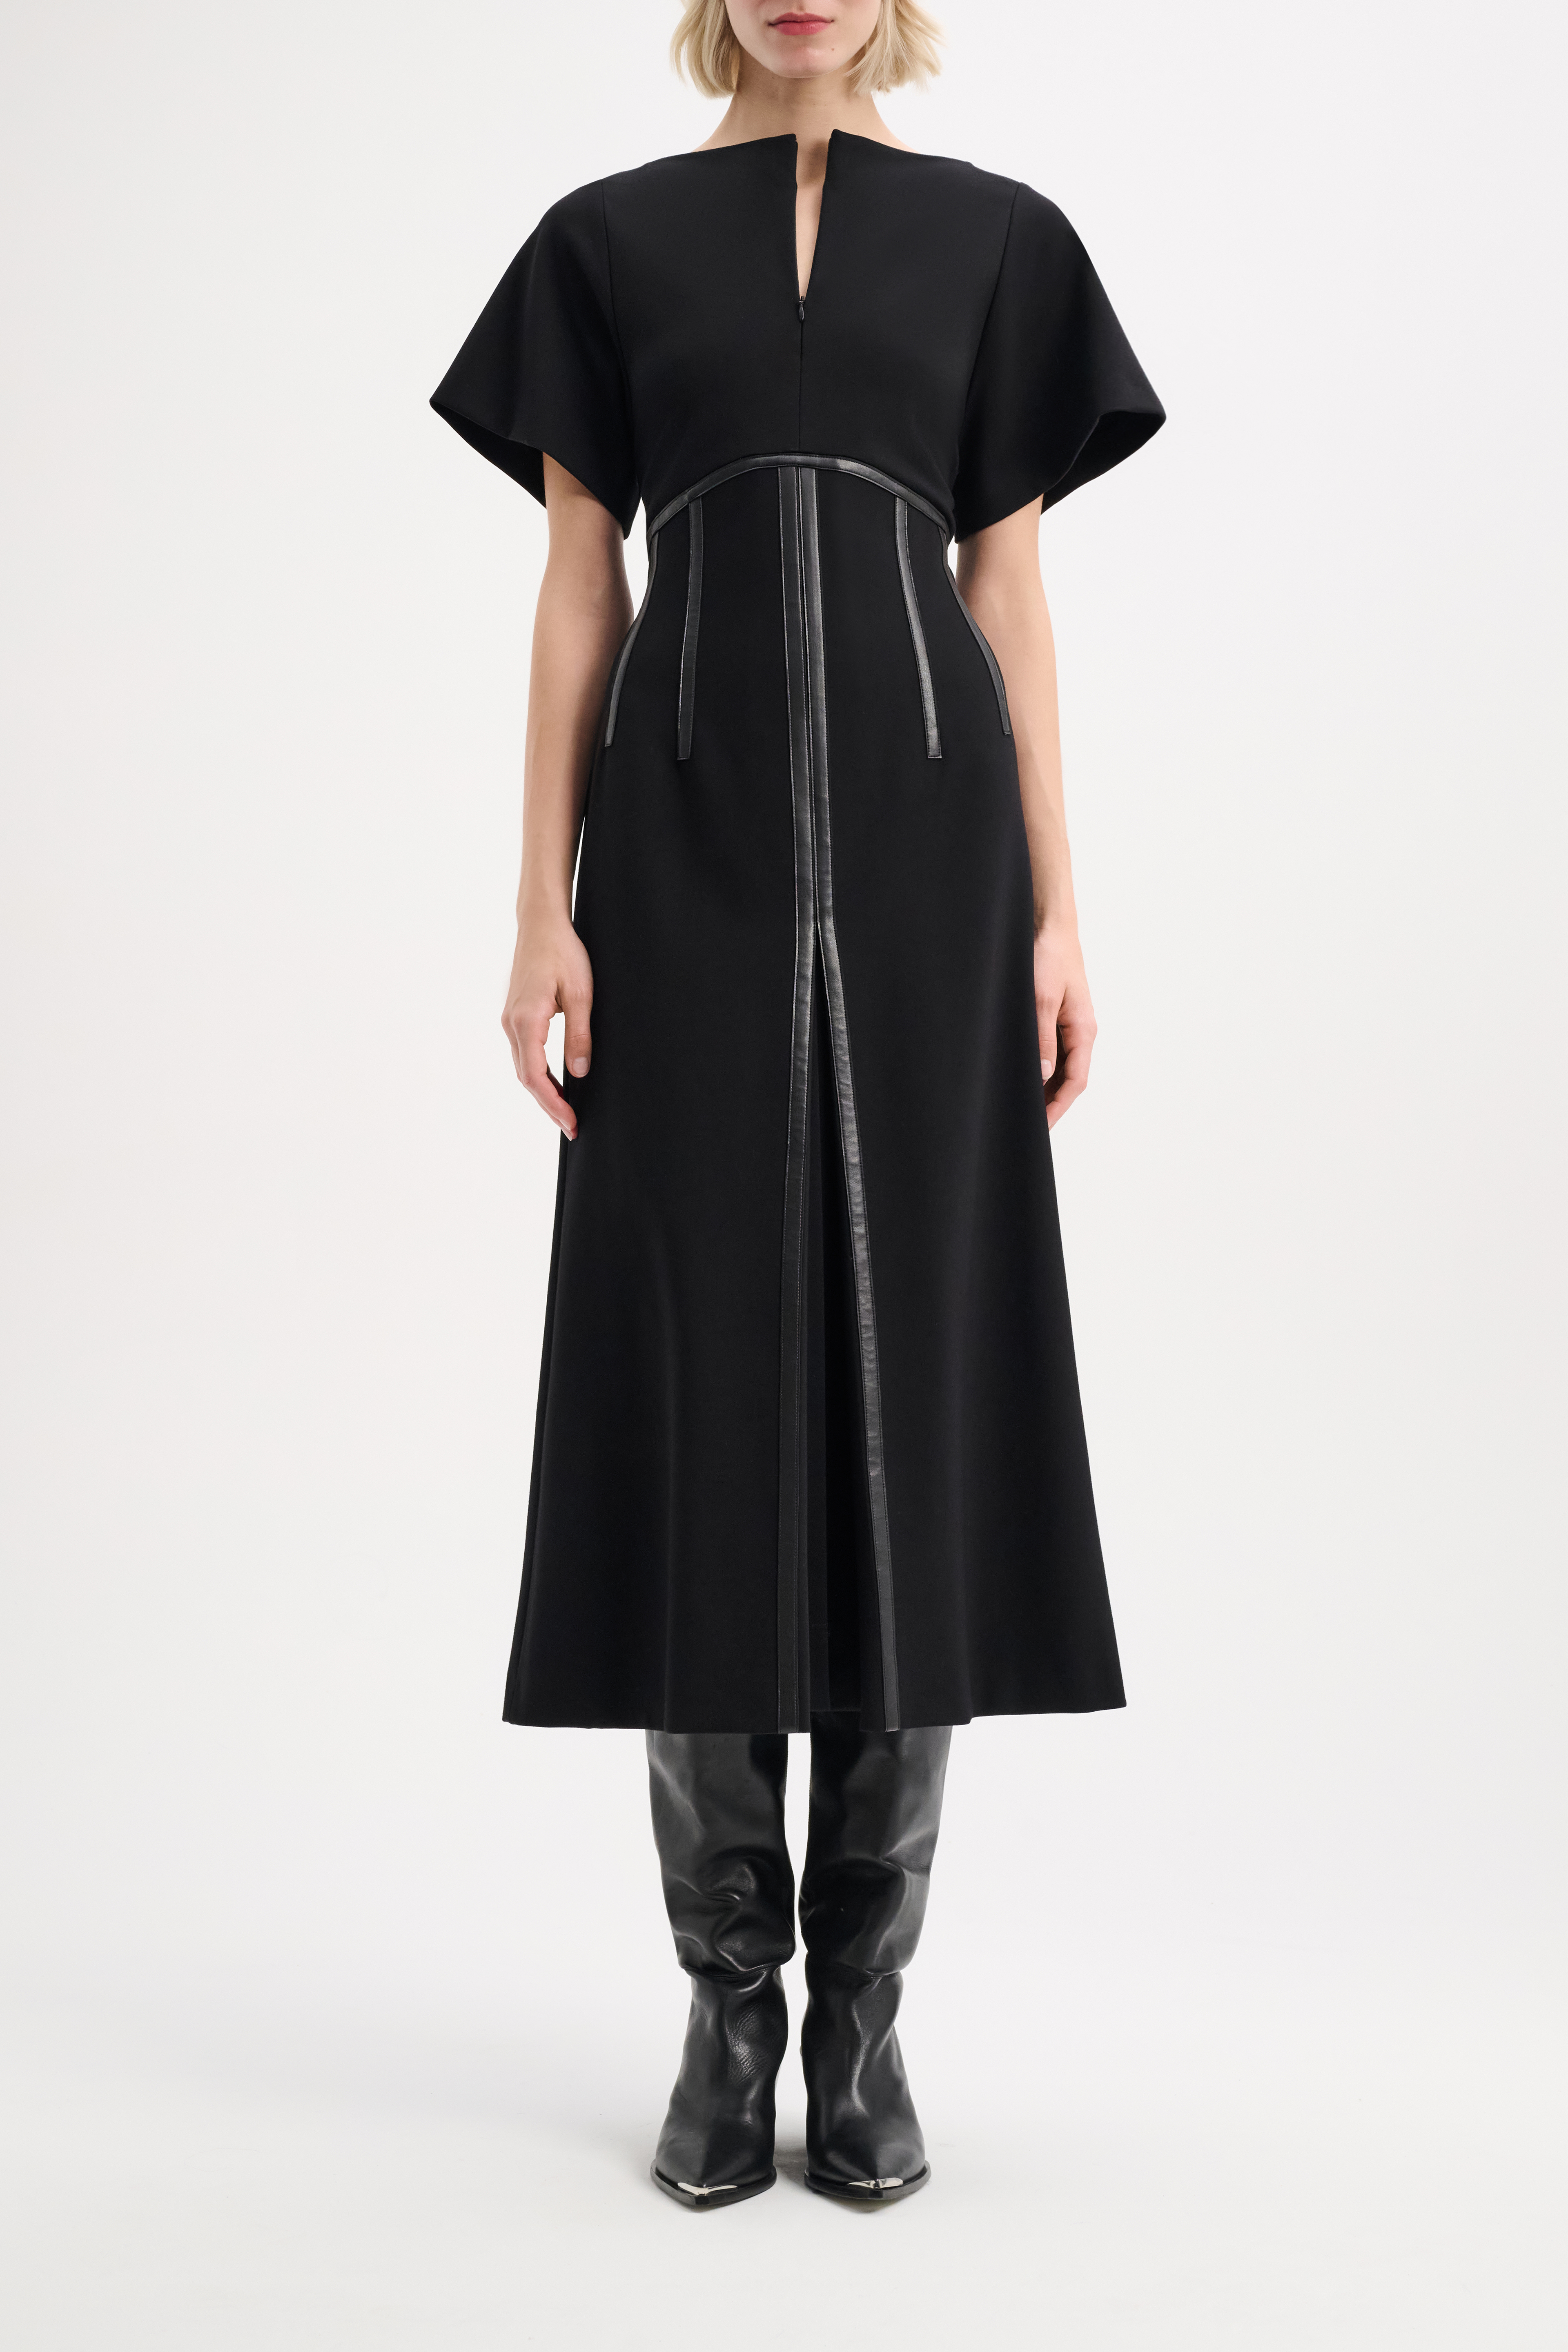 Dorothee Schumacher Dress in Punto Milano with eco leather